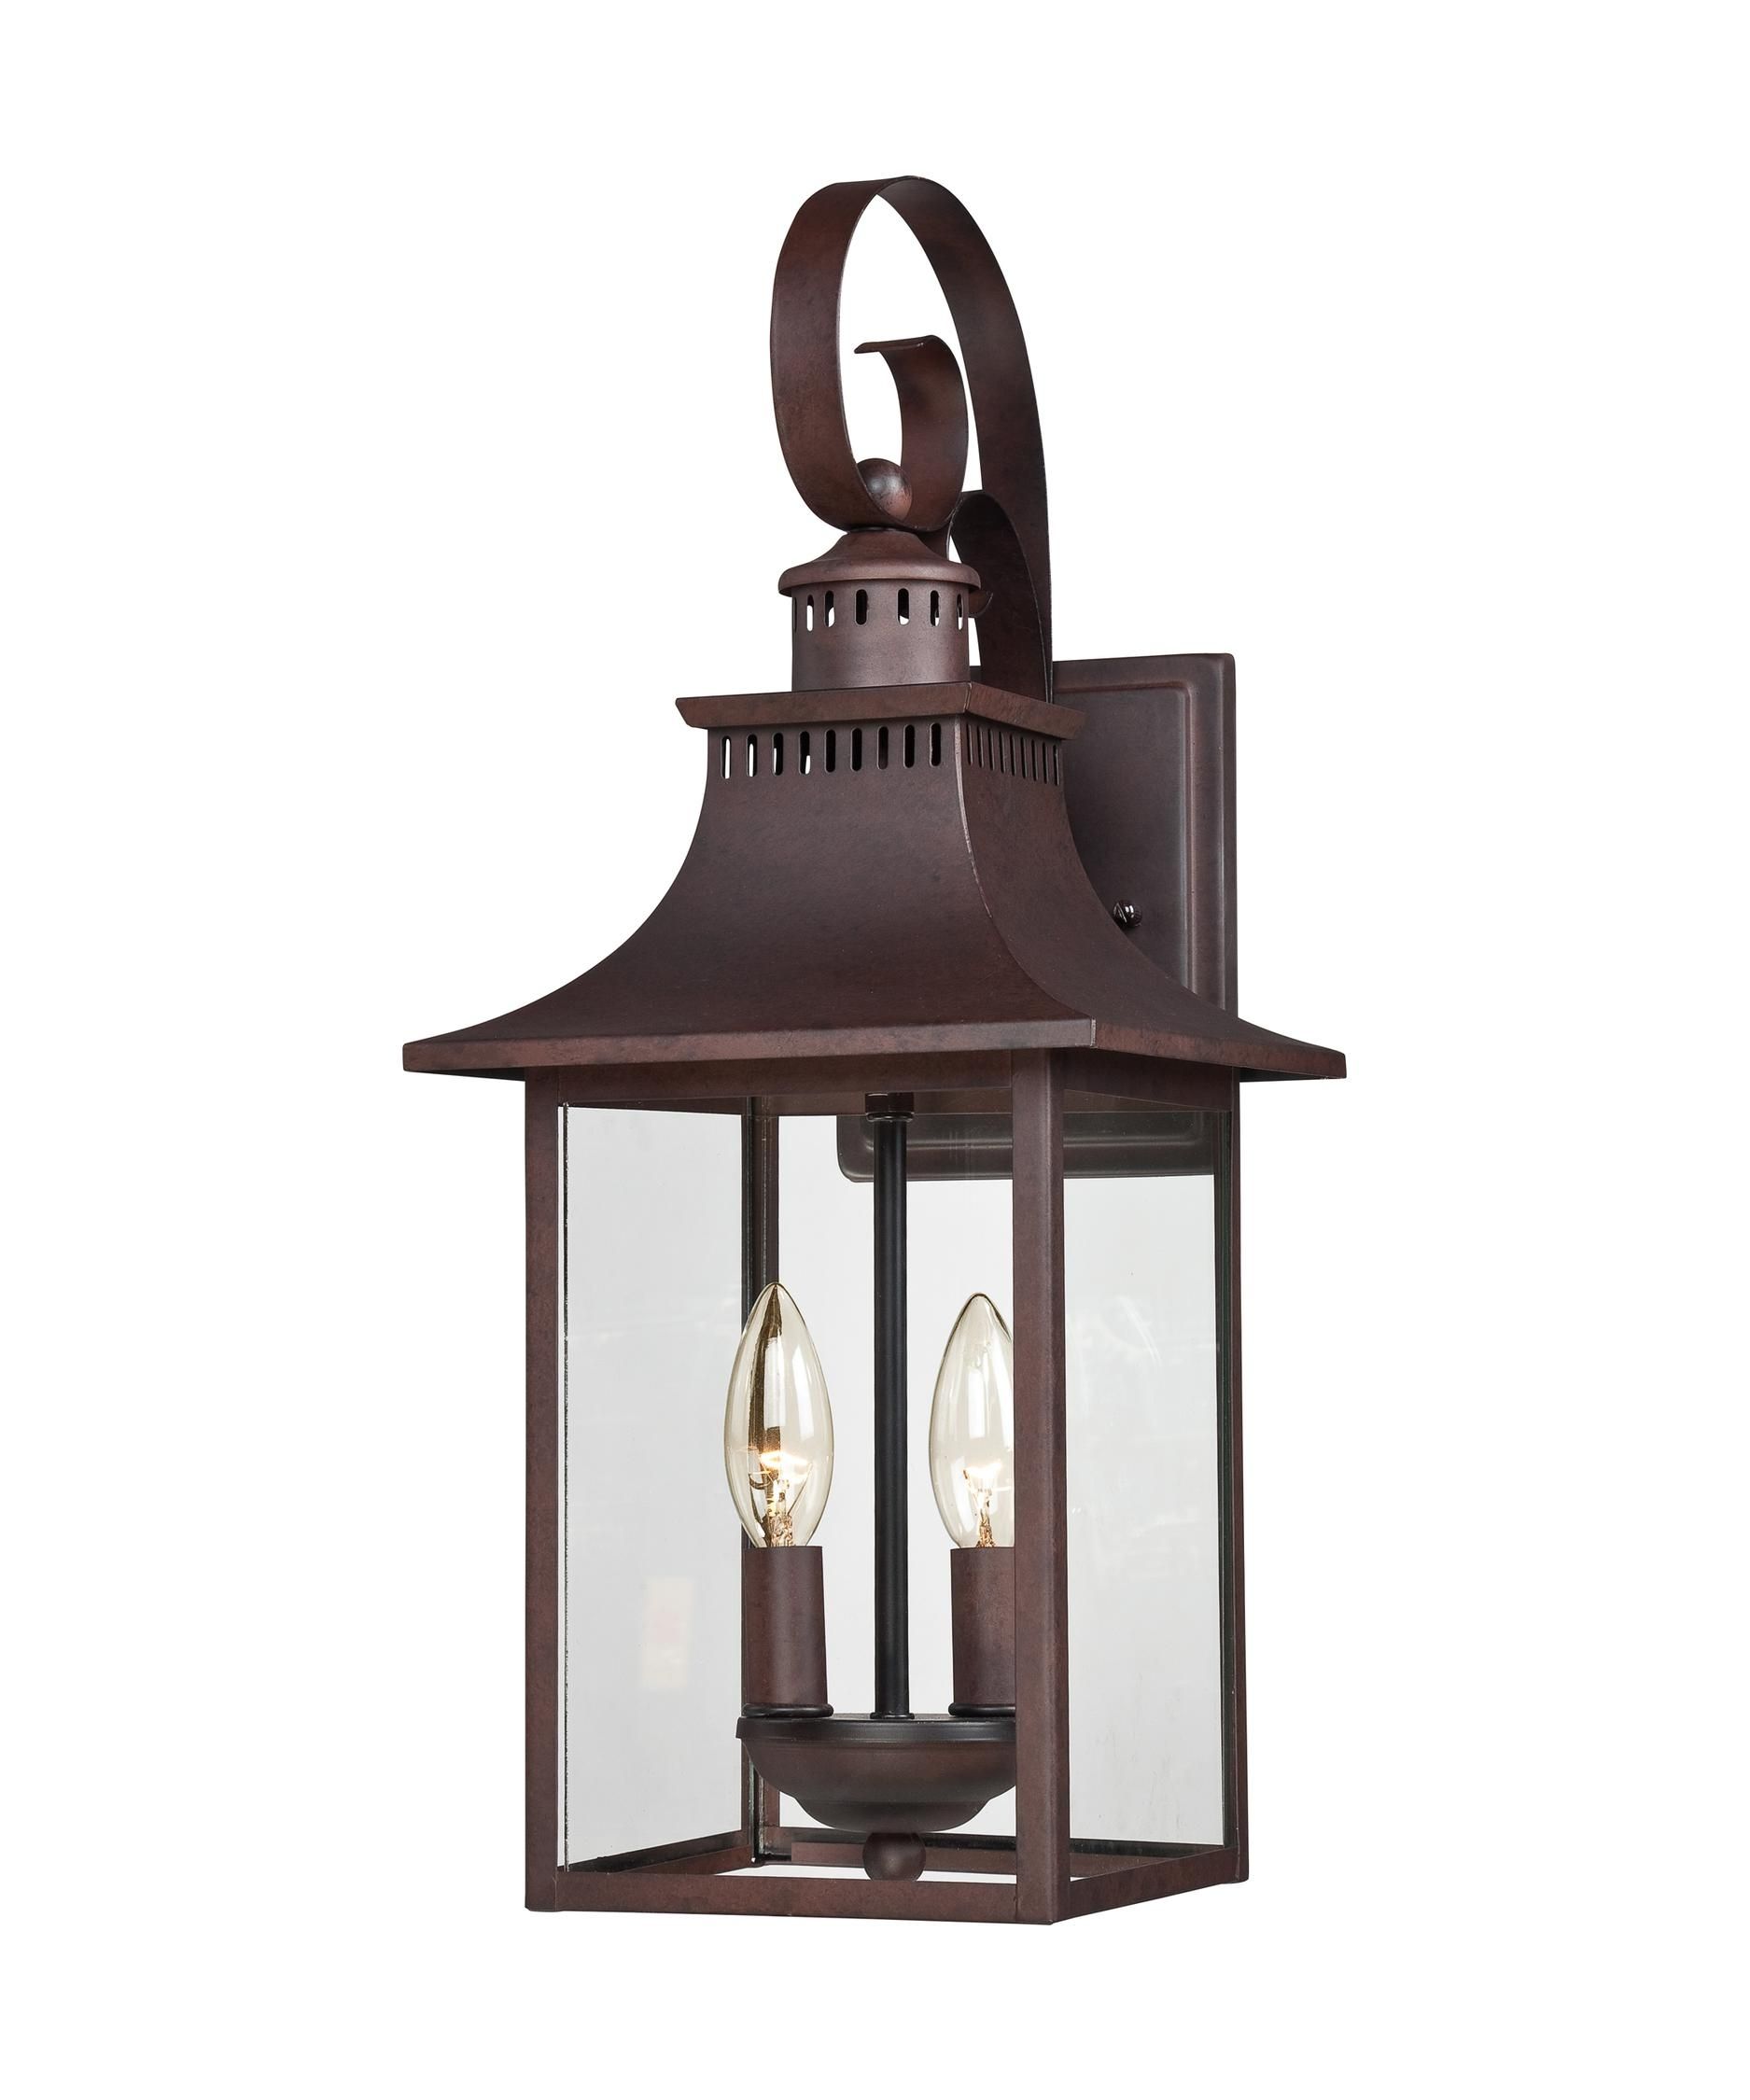 Quoizel Ccr8408 Chancellor 8 Inch Wide 2 Light Outdoor Wall Light With Quoizel Outdoor Lanterns (View 6 of 20)